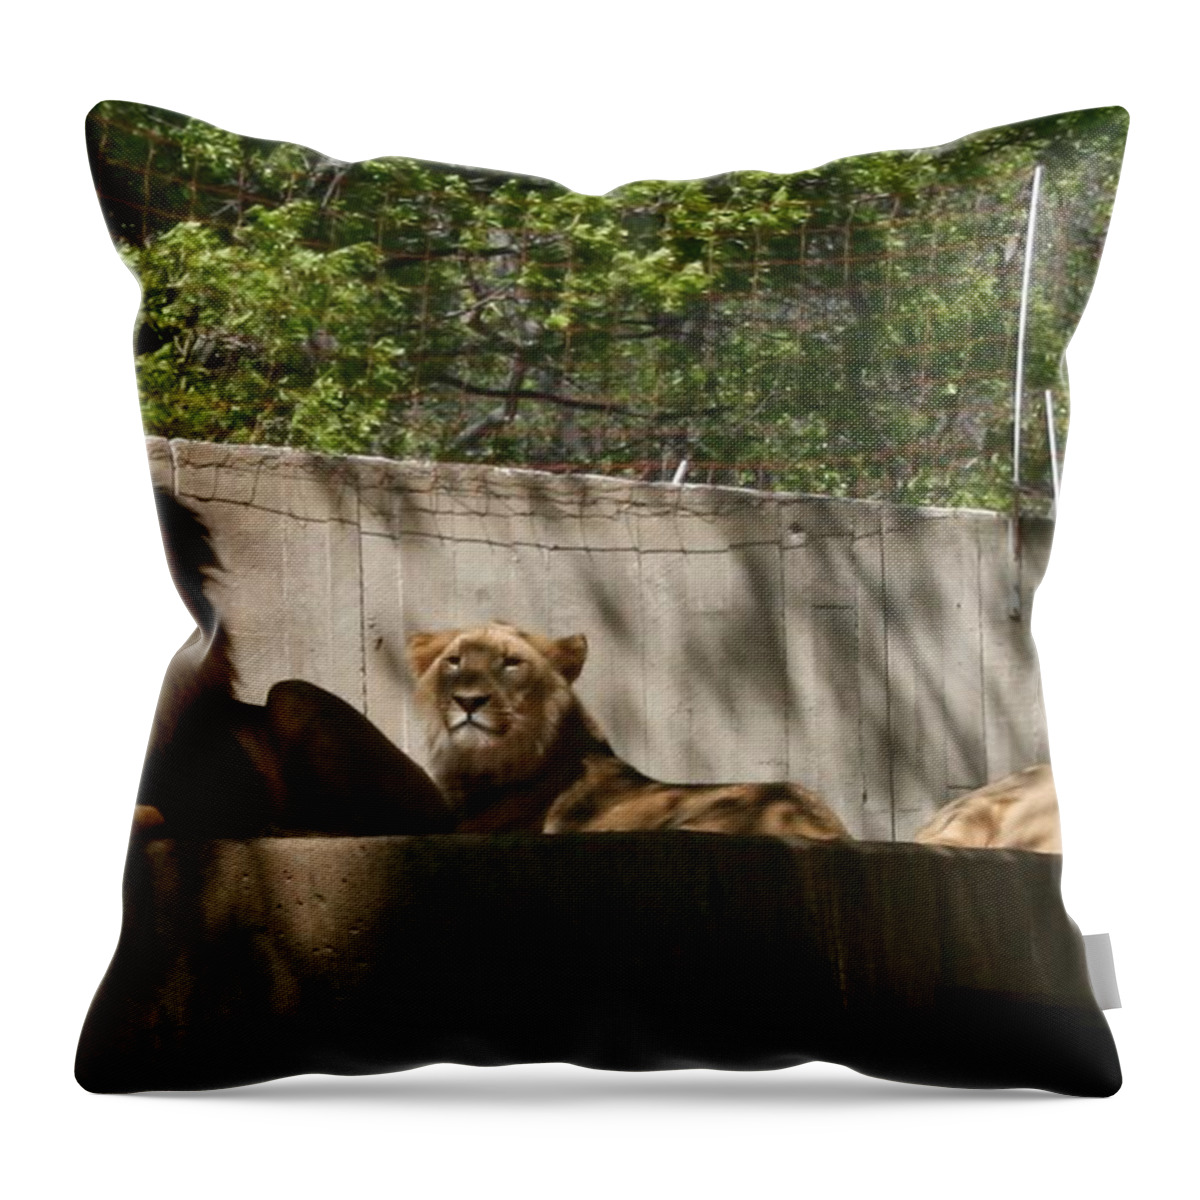 Lion Throw Pillow featuring the photograph Lion Around by Stacy C Bottoms